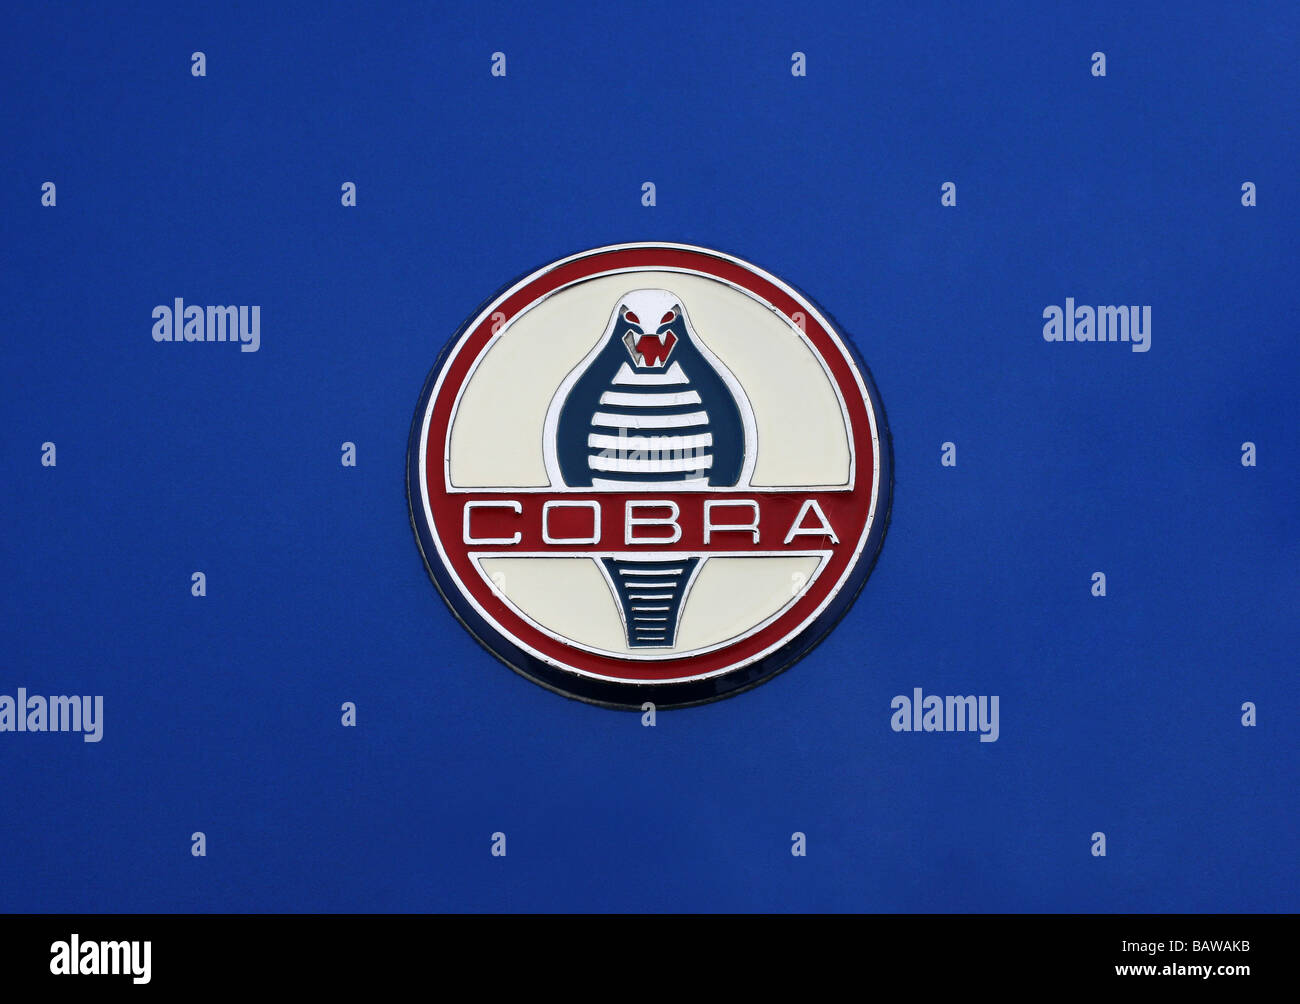 Cobra logos stock photography and images - Alamy